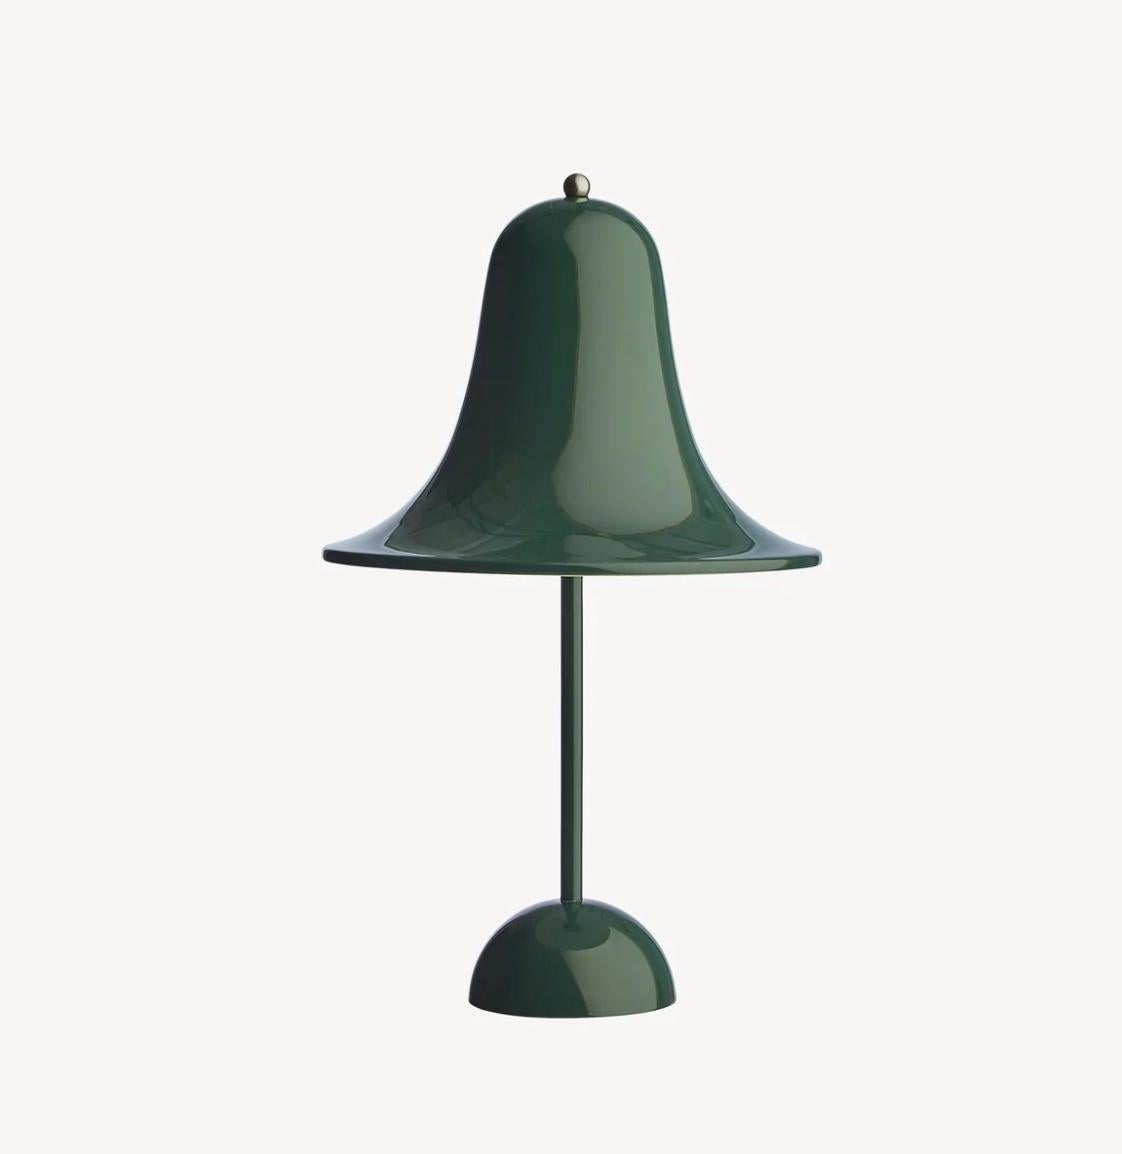 Verner Panton 'Pantop Portable' table lamp in 'Dark Green' for Verpan. Designed in 1980. New, current production.

This is a versatile smaller and wireless version of the 'Pantop' table lamp, usb-chargeable. 

The elegant Pantop line was